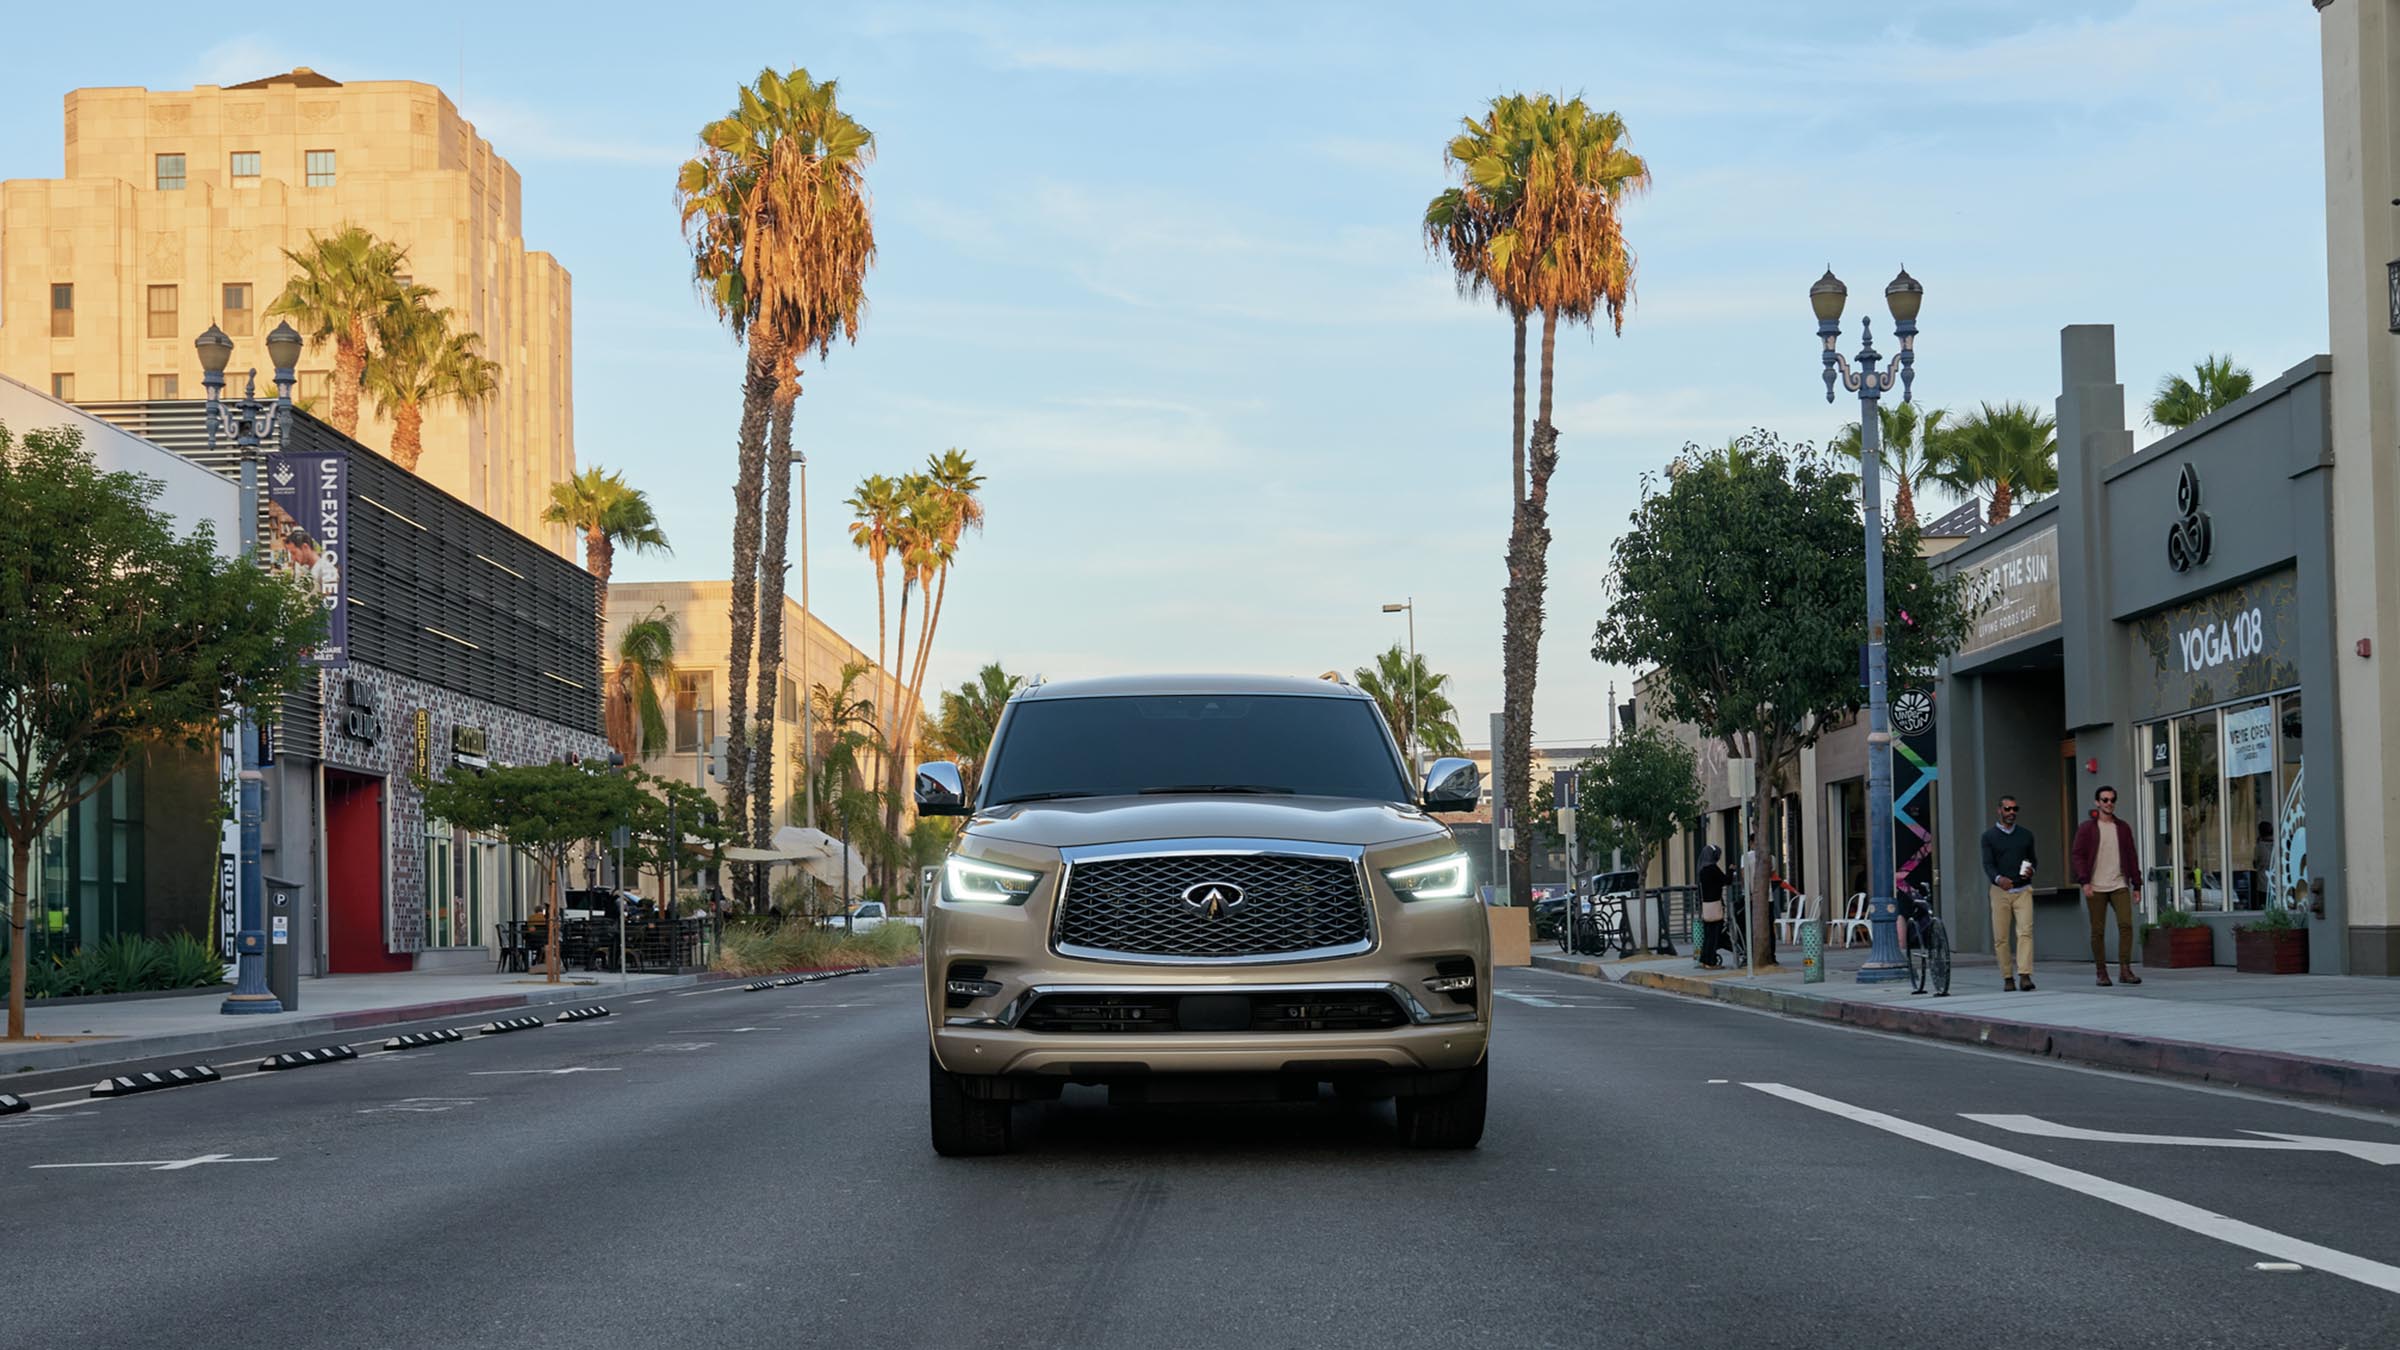 2022 INFINITI QX80 SUV driver seat, middle console and passenger seat.